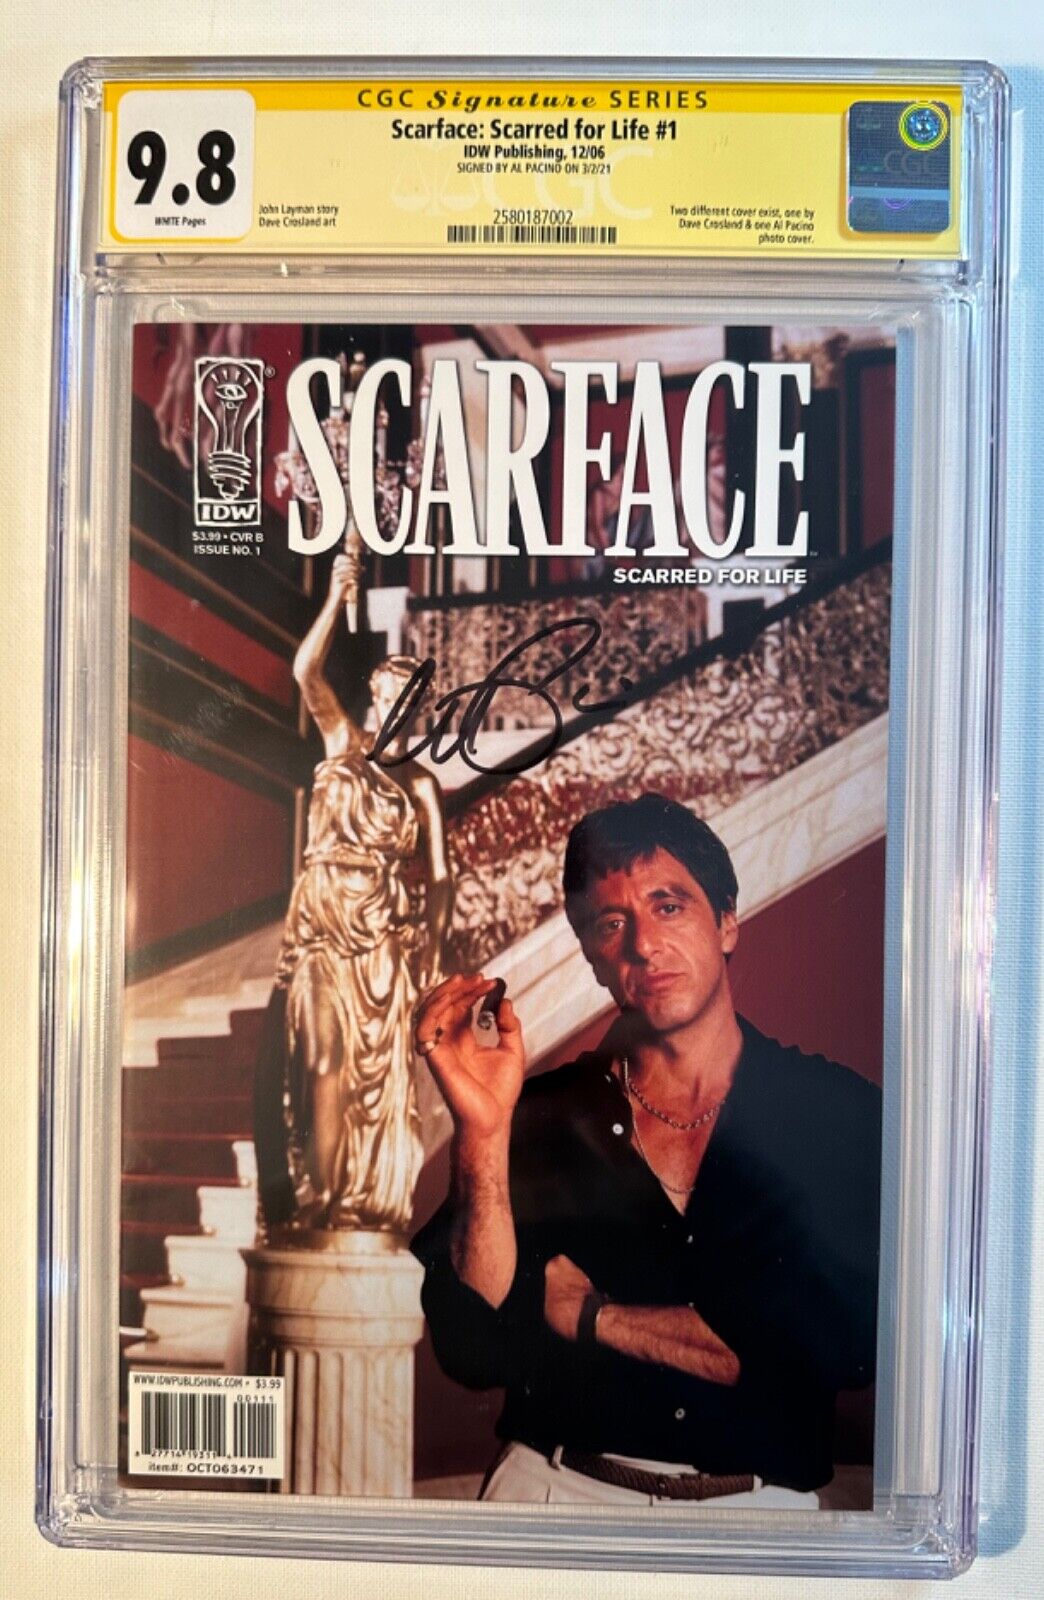 Scarface: Scarred for Life #1 Movie Photo Cover CGC SS 9.8 Signed Al Pacino 🔥